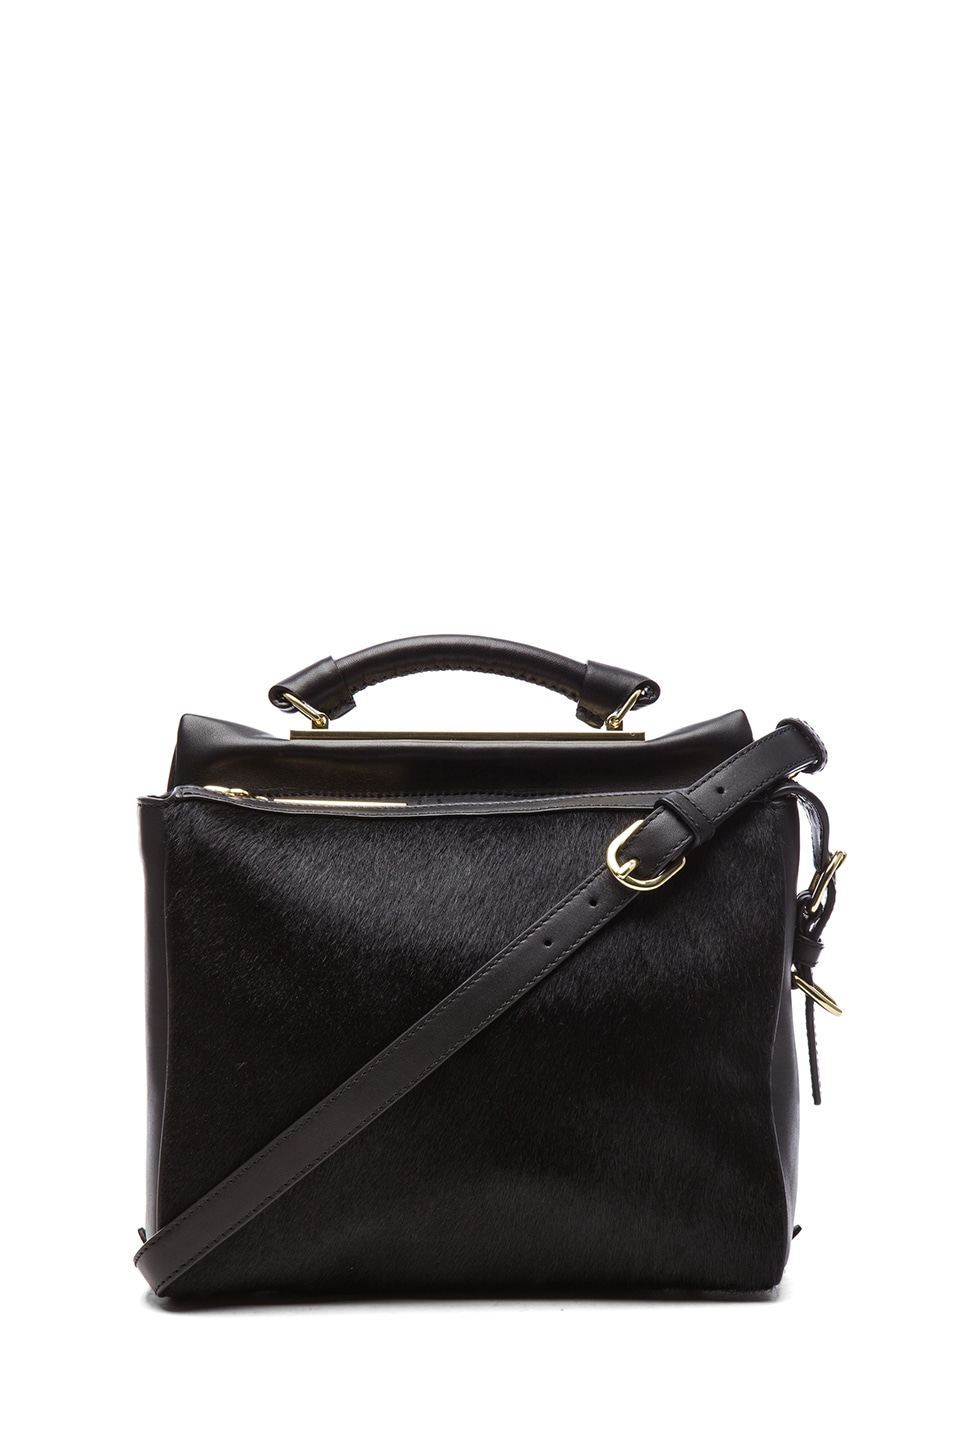 Image 1 of 3.1 phillip lim Small Ryder Satchel in Black